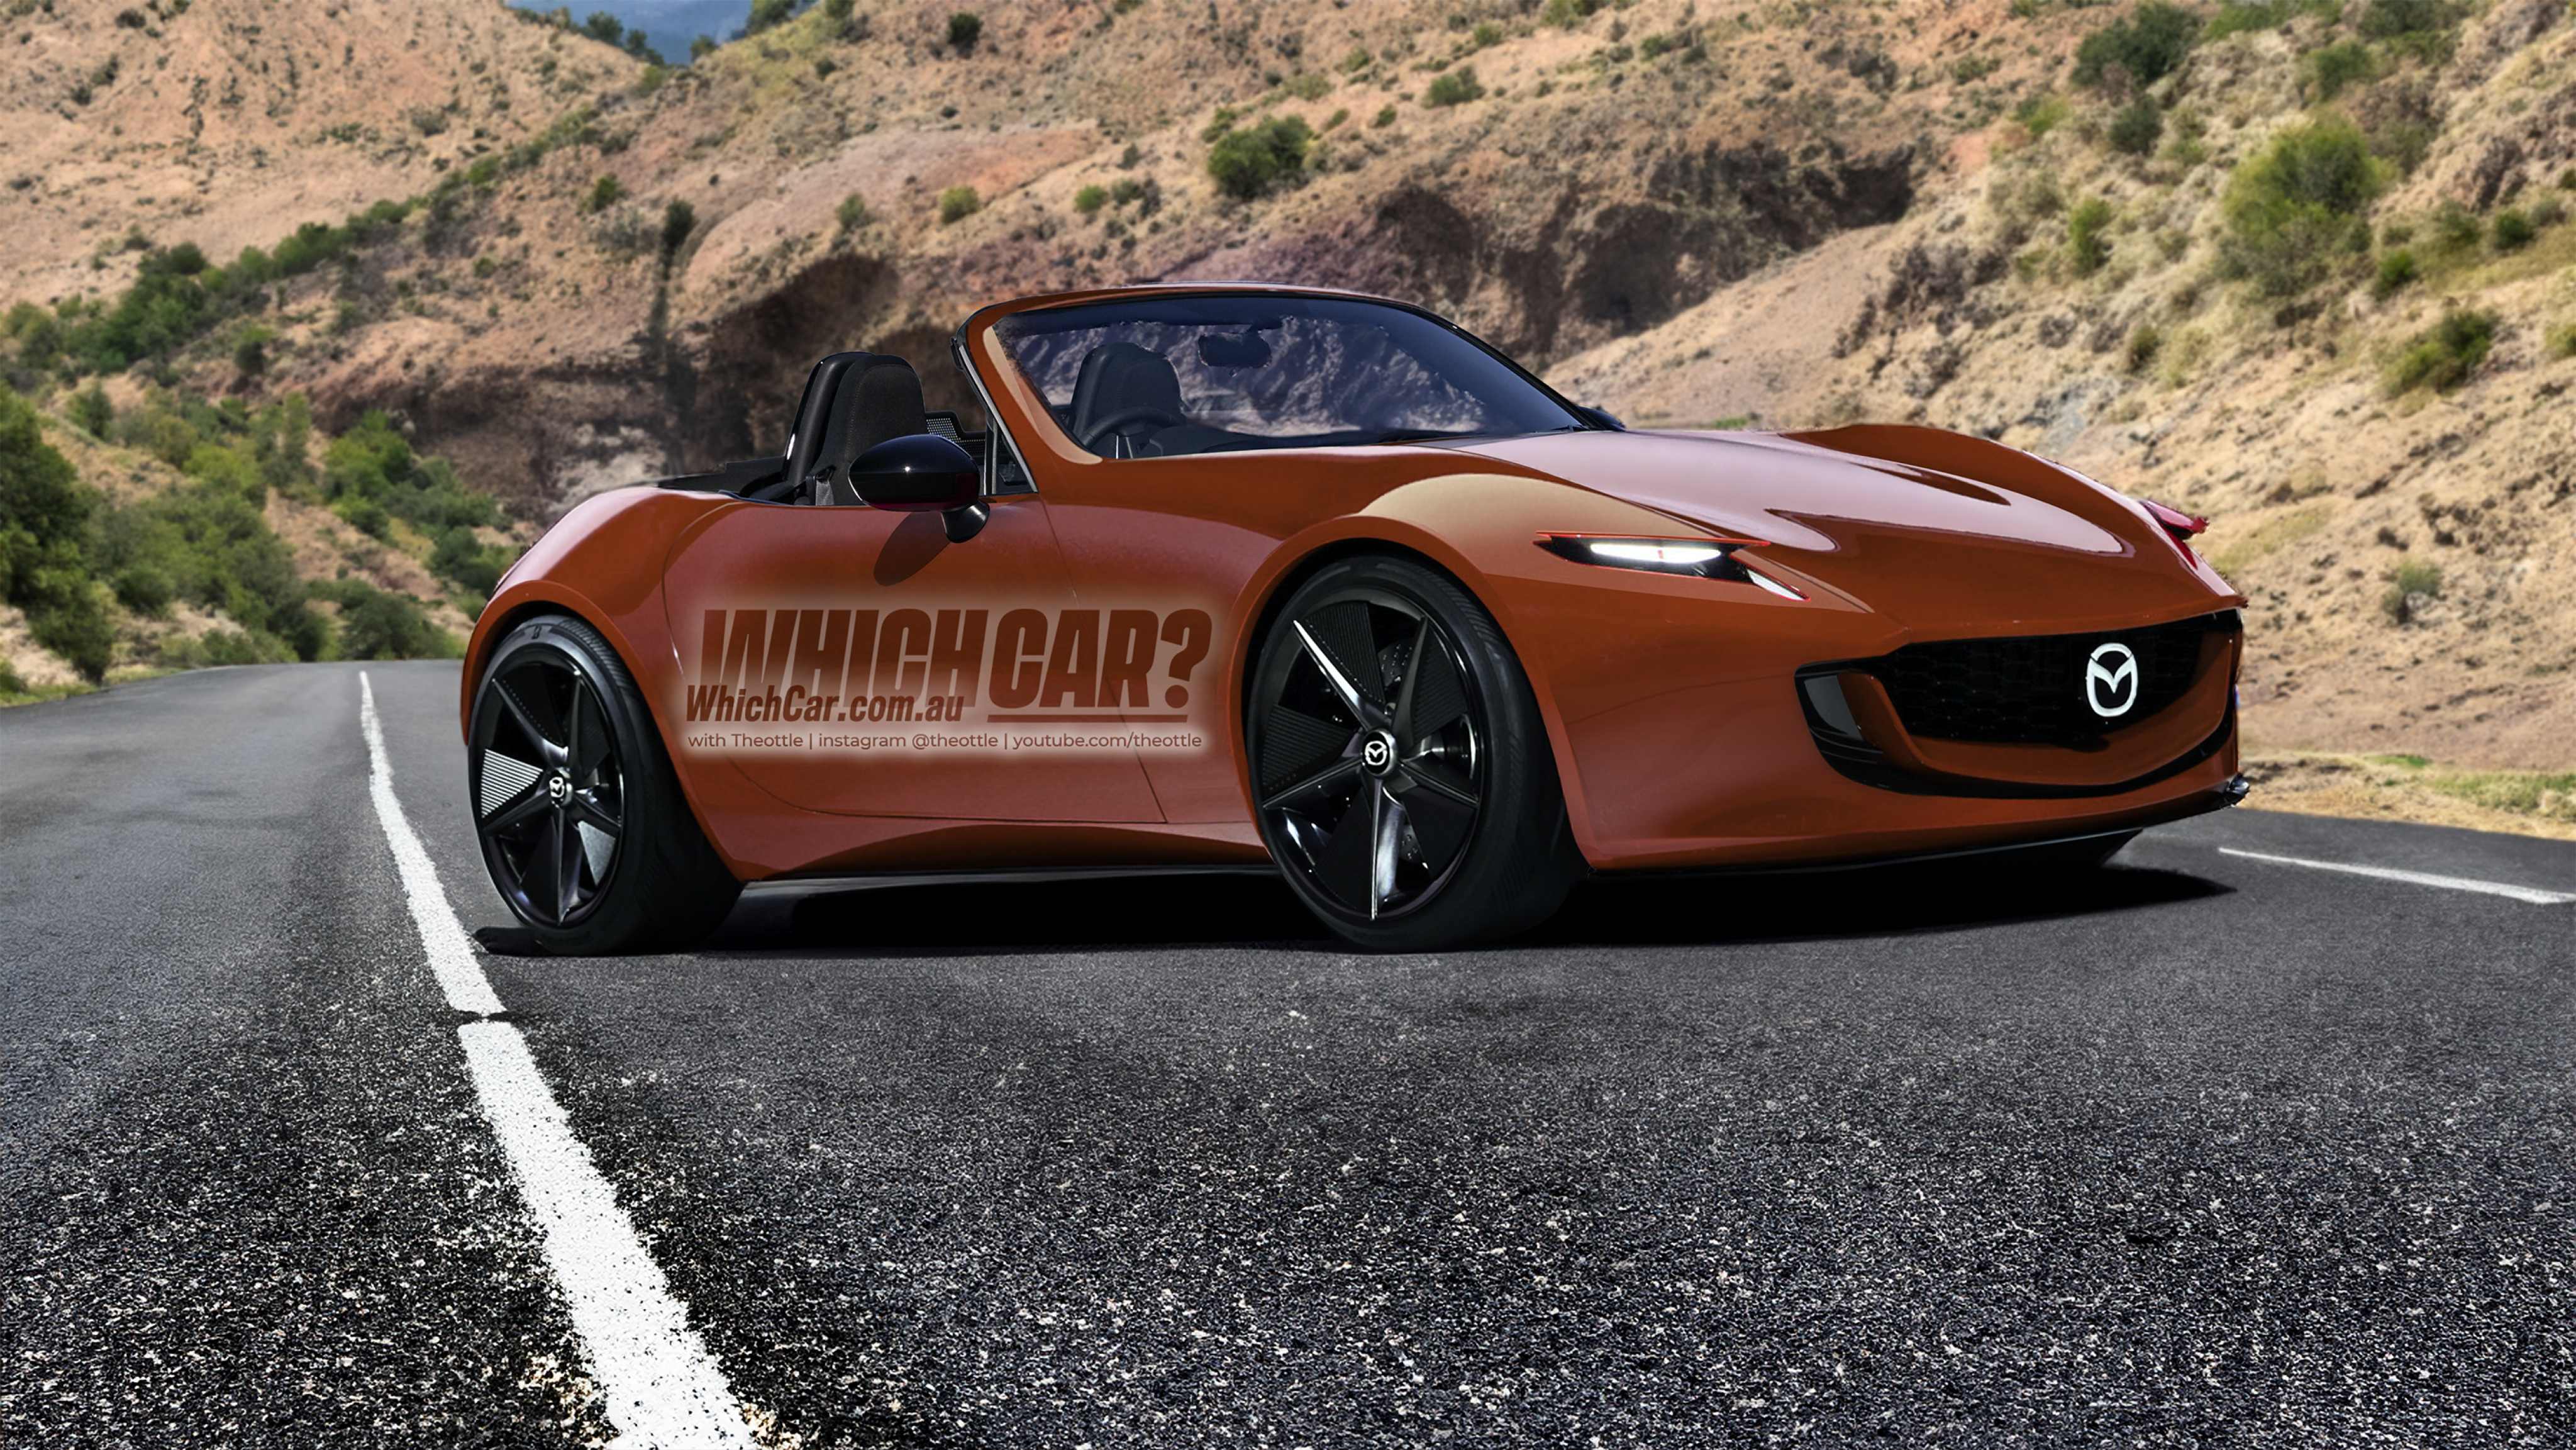 https://cdn.whichcar.com.au/assets/w_4096/aacd187a/2025-mazda-mx-5-whichcar-australia-theottle-01.png